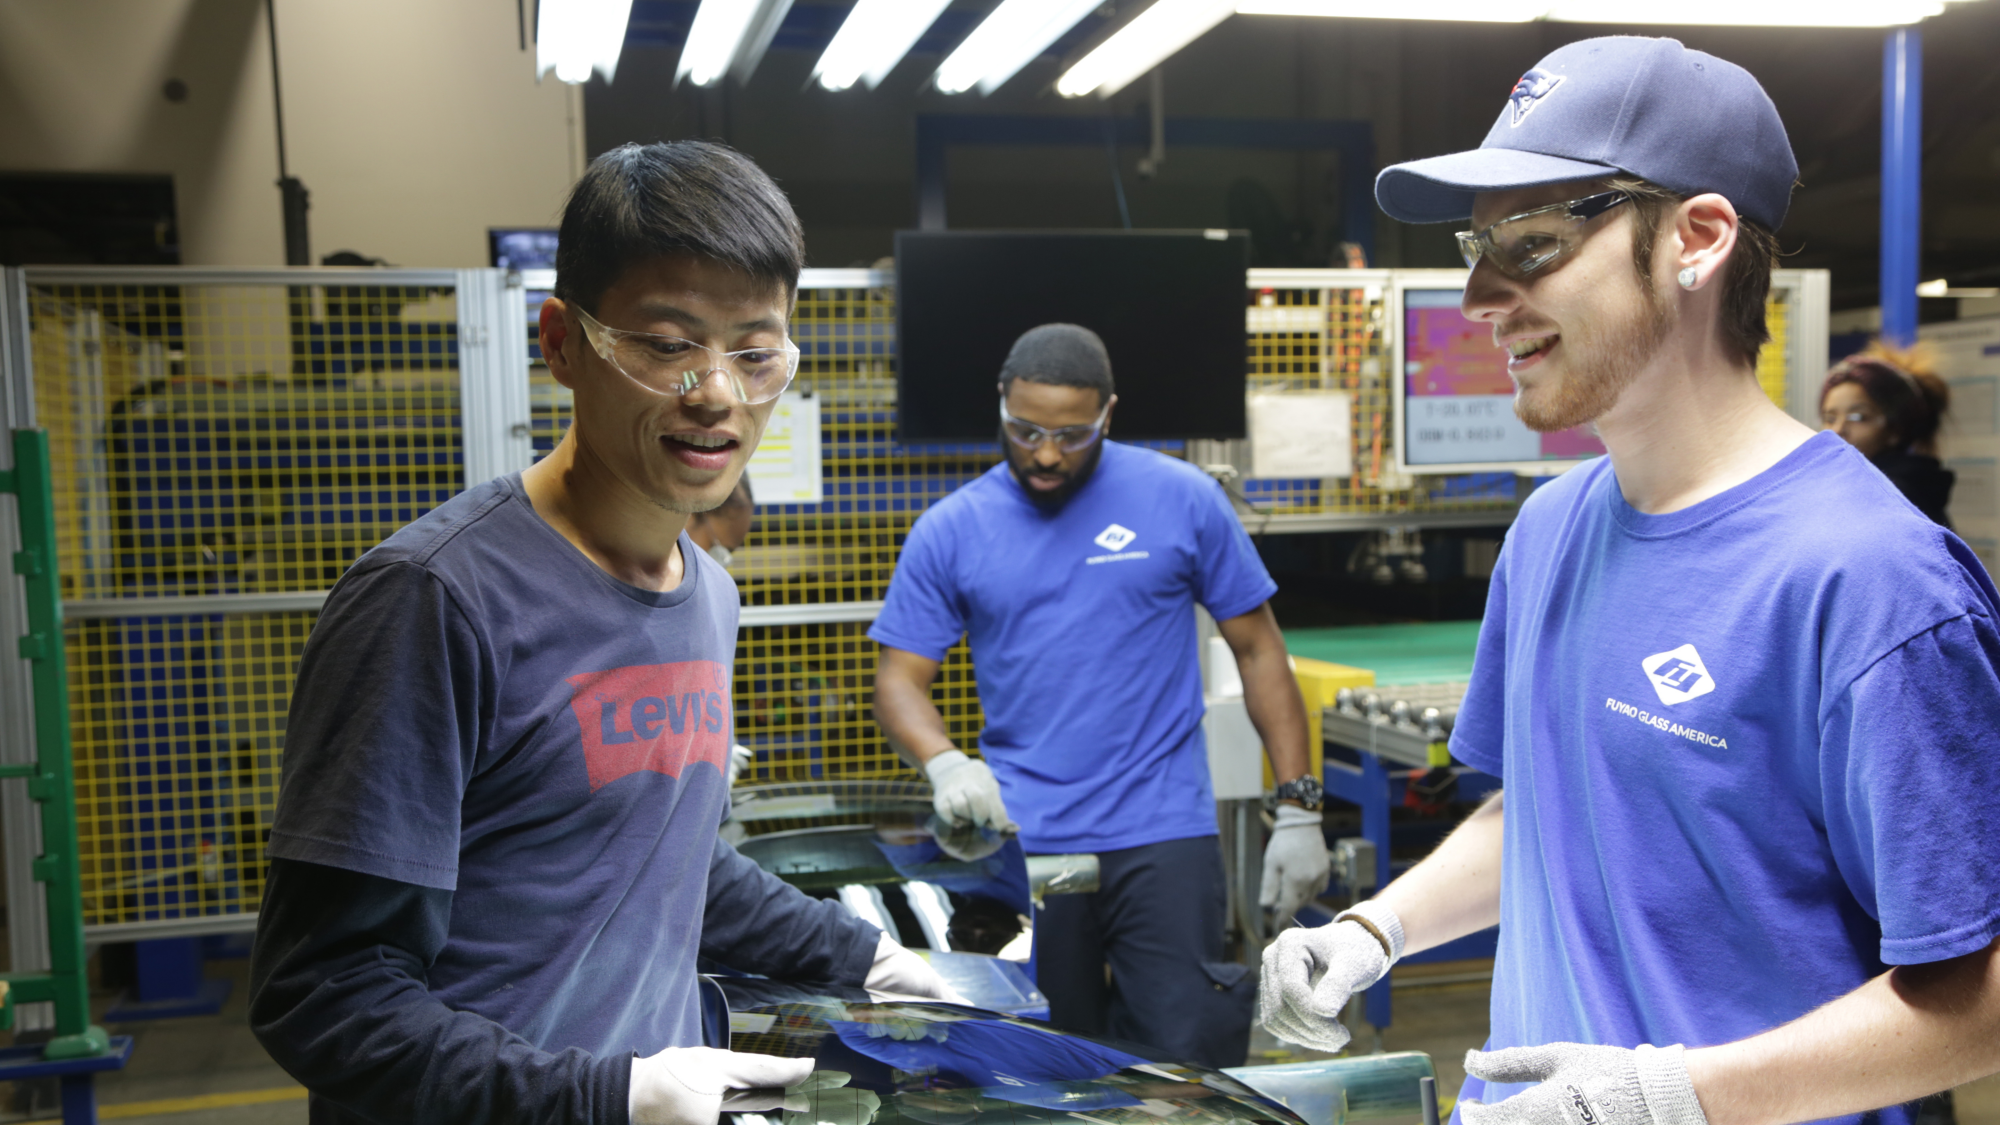 Wong He working with Kenny Taylor and Jarred Gibson in the Fuyao factory in Dayton, Ohio.